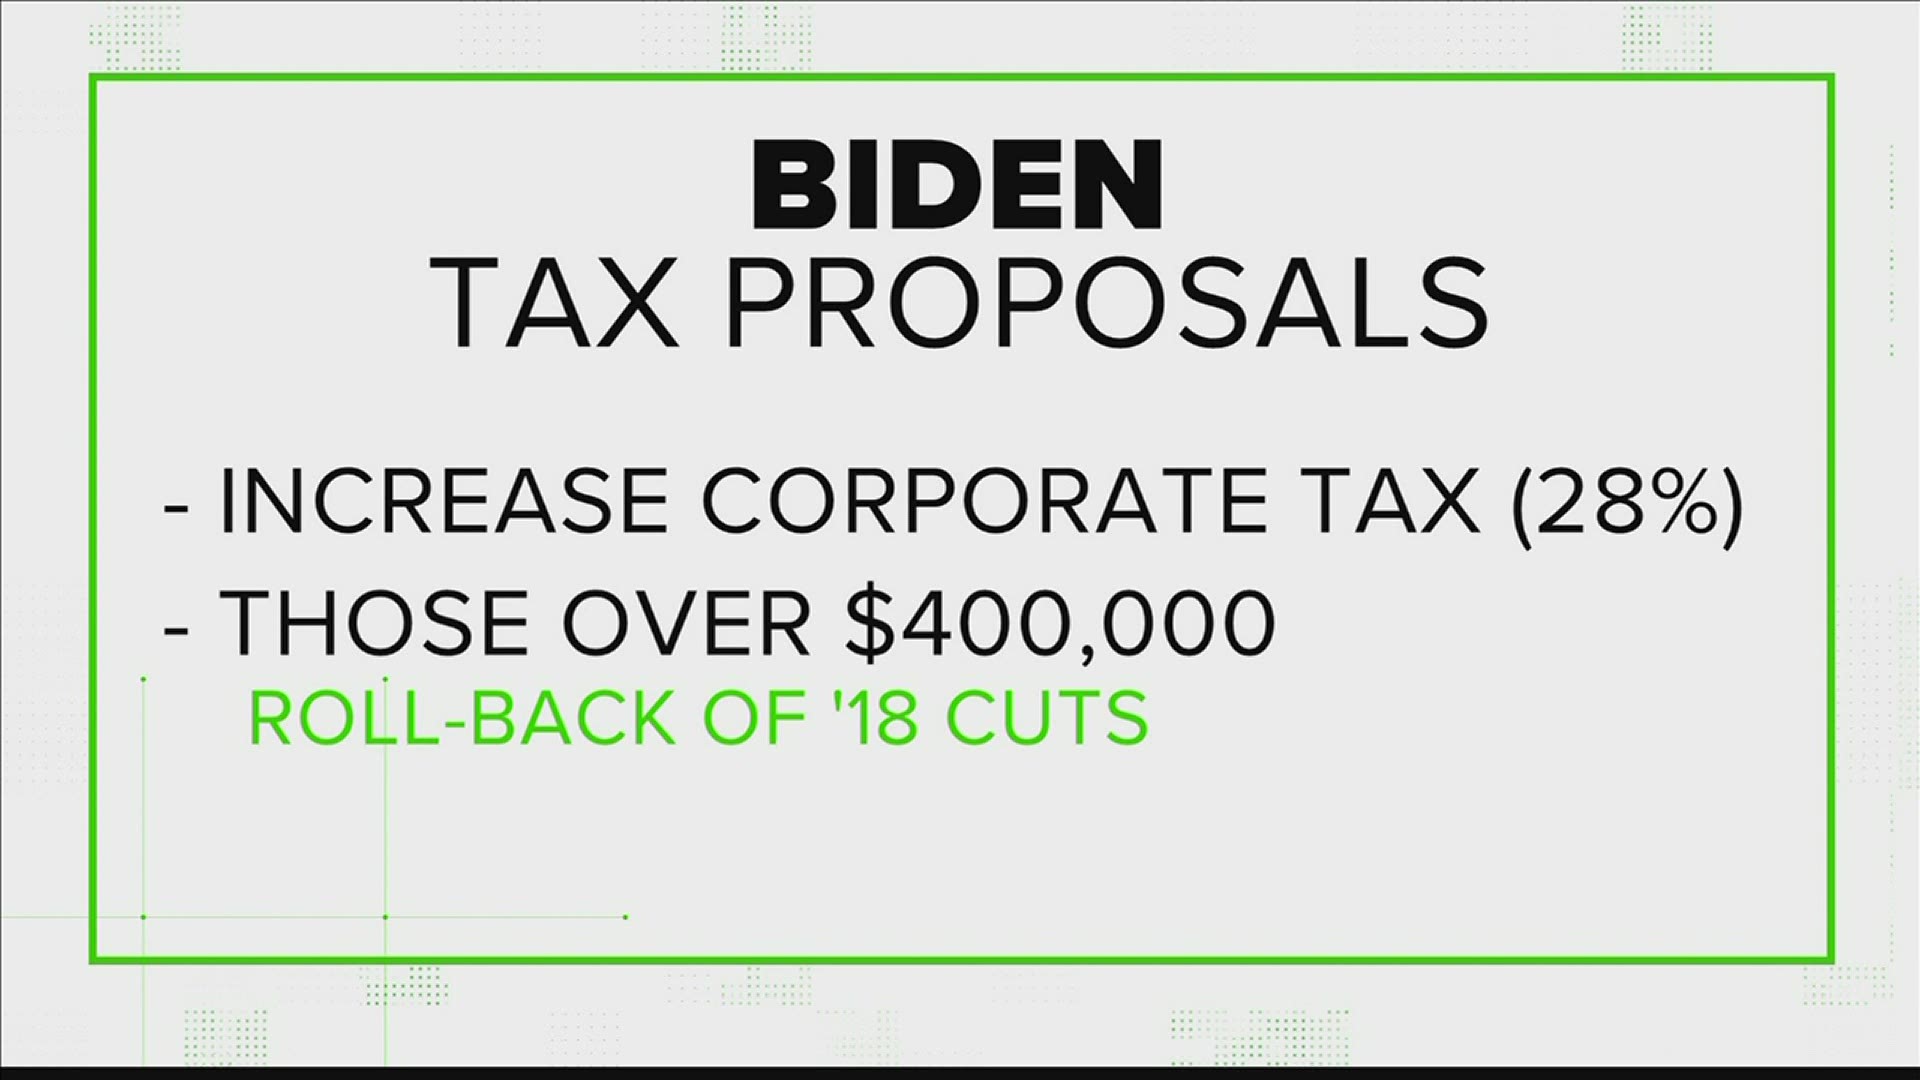 A viral post claims that Biden is proposing an increase to the tax rate for families making $75,000. This is false.